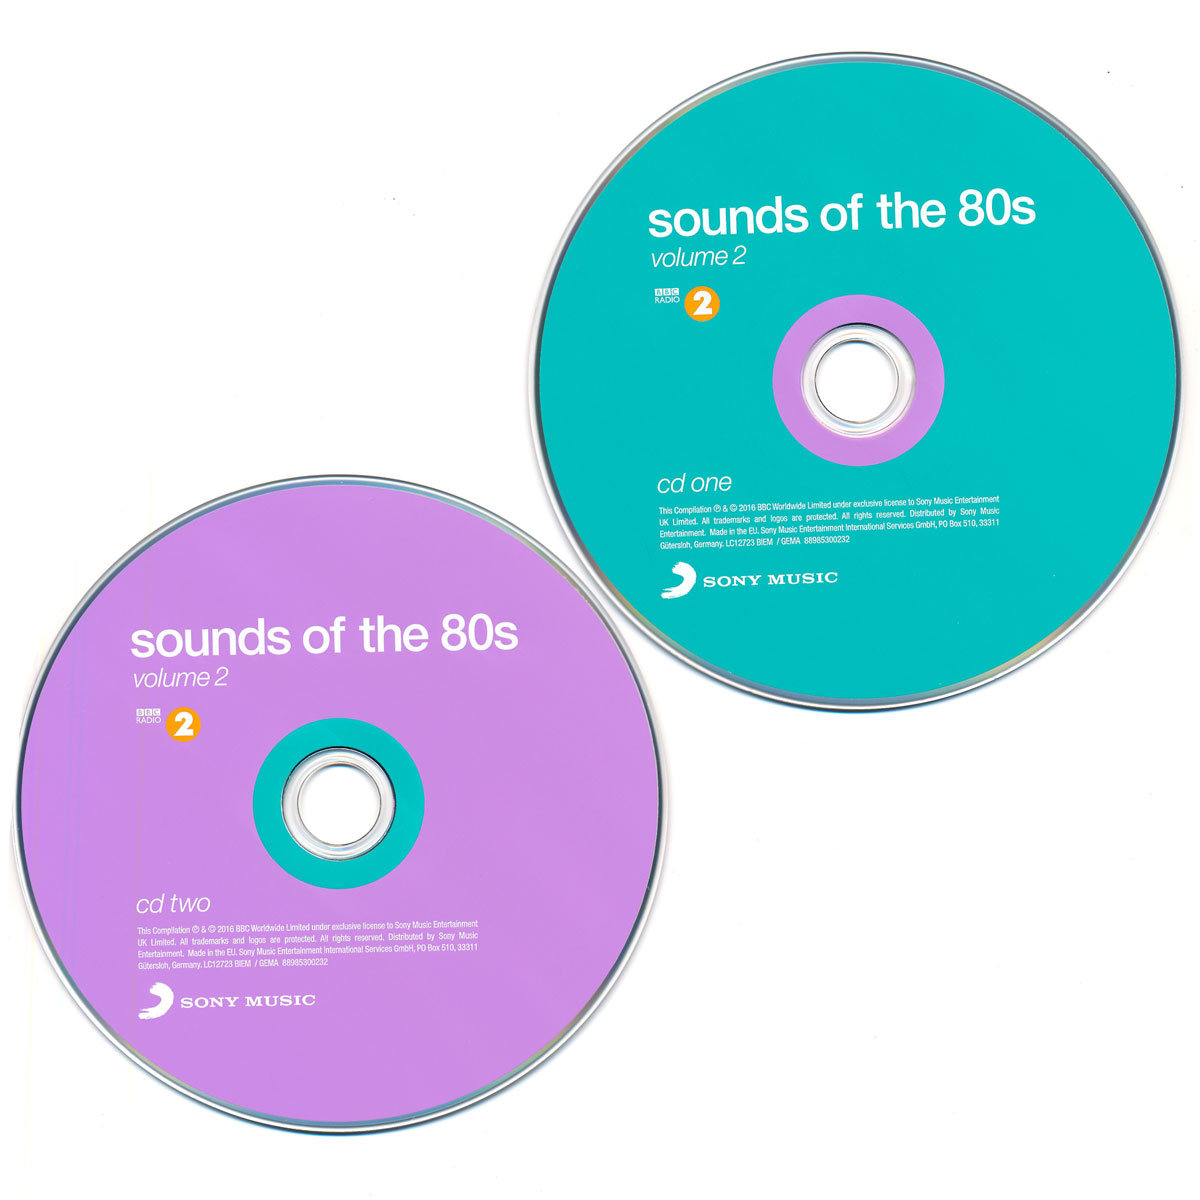 BBC Radio 2 - Sounds of the 80s - Available now